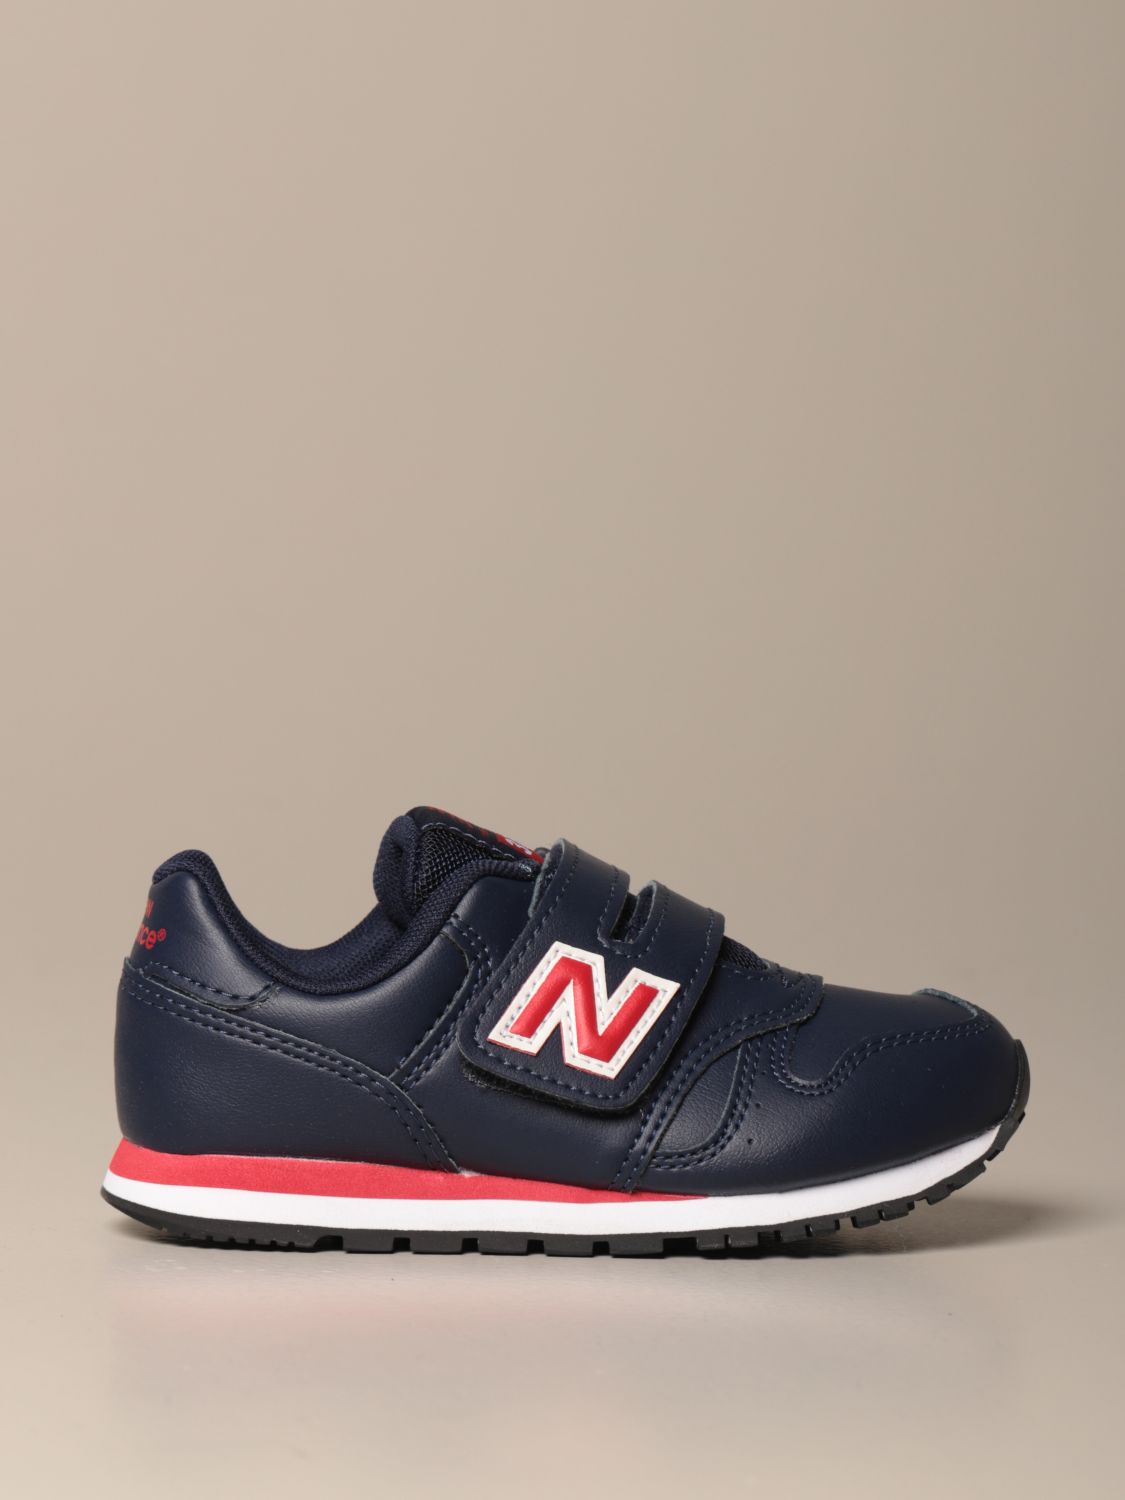 New Balance Outlet: Chaussures enfant | Chaussures New Balance ...